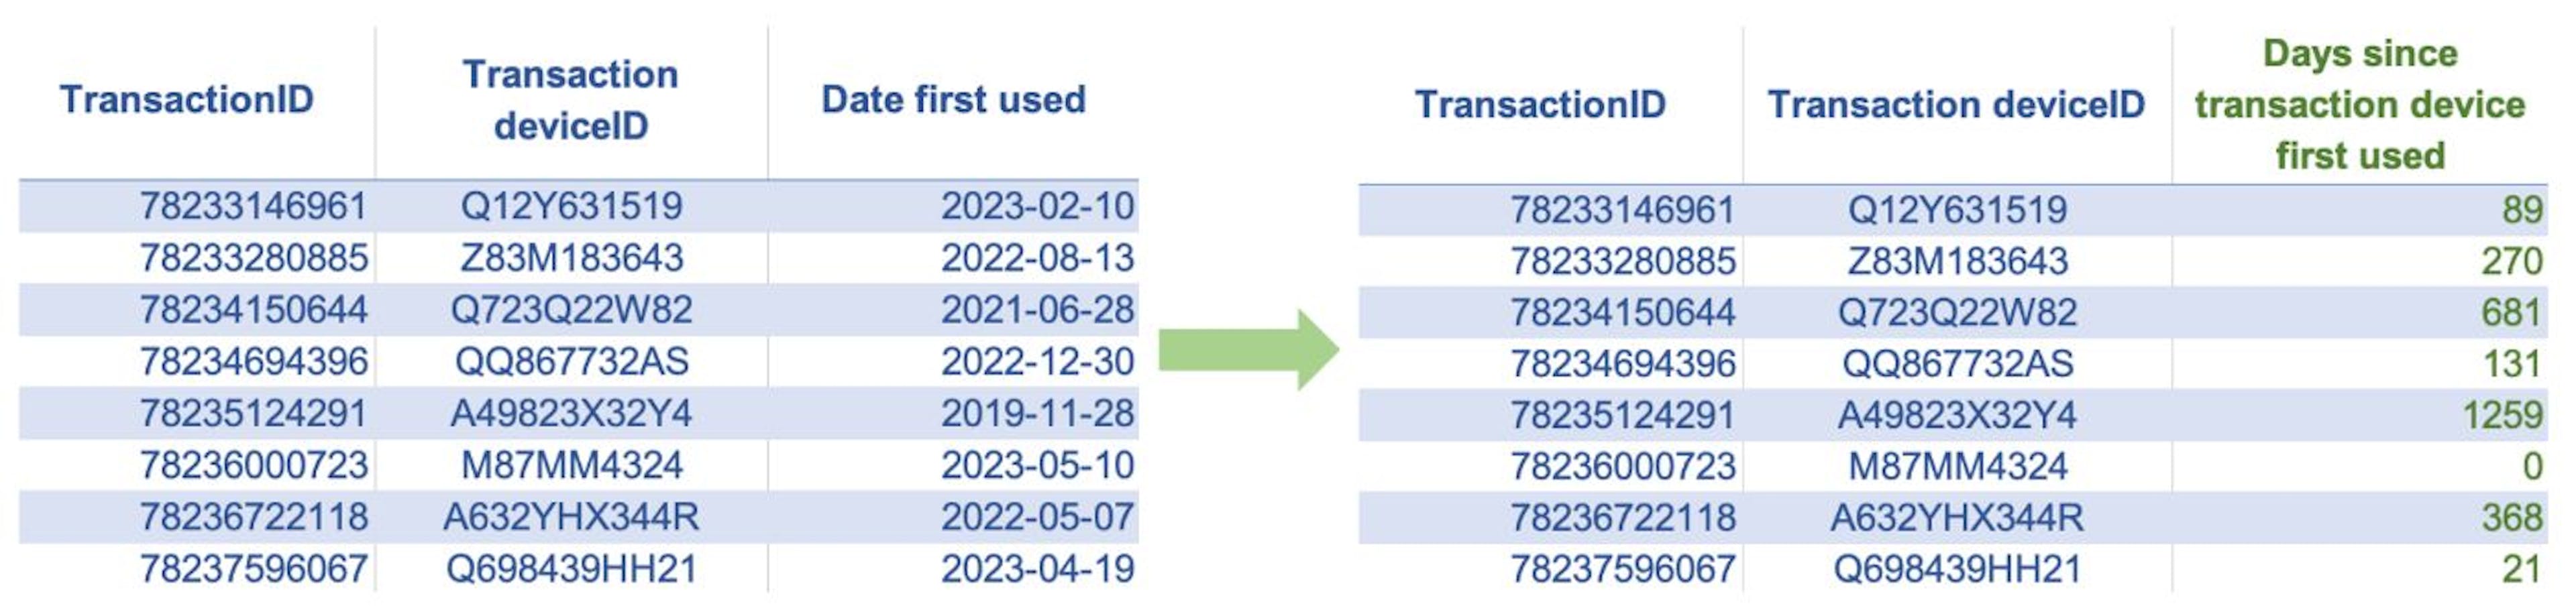 The tables above show an example of age encoding. Here, we have created a new numeric feature "Days since transaction device first used" as the difference in days between the customer's device first use date and the current transaction date.